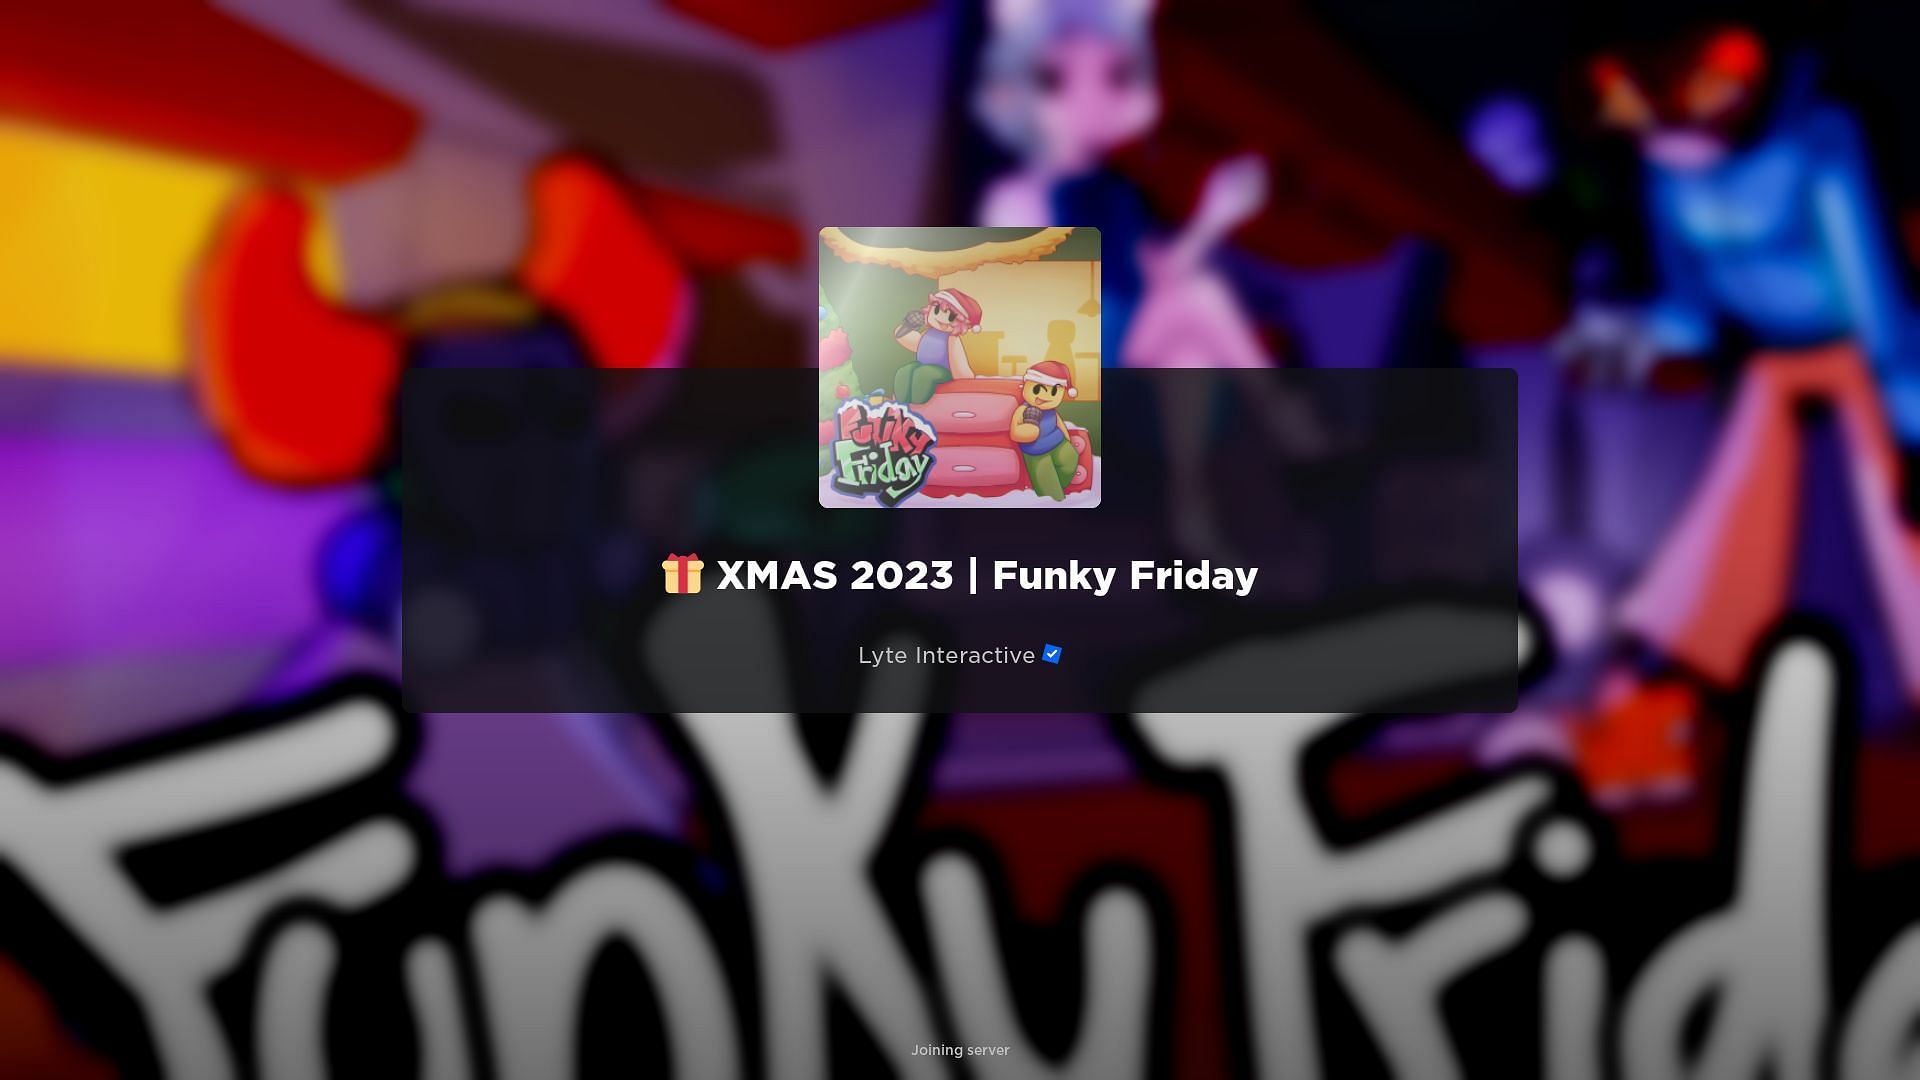 Roblox Funky Friday codes